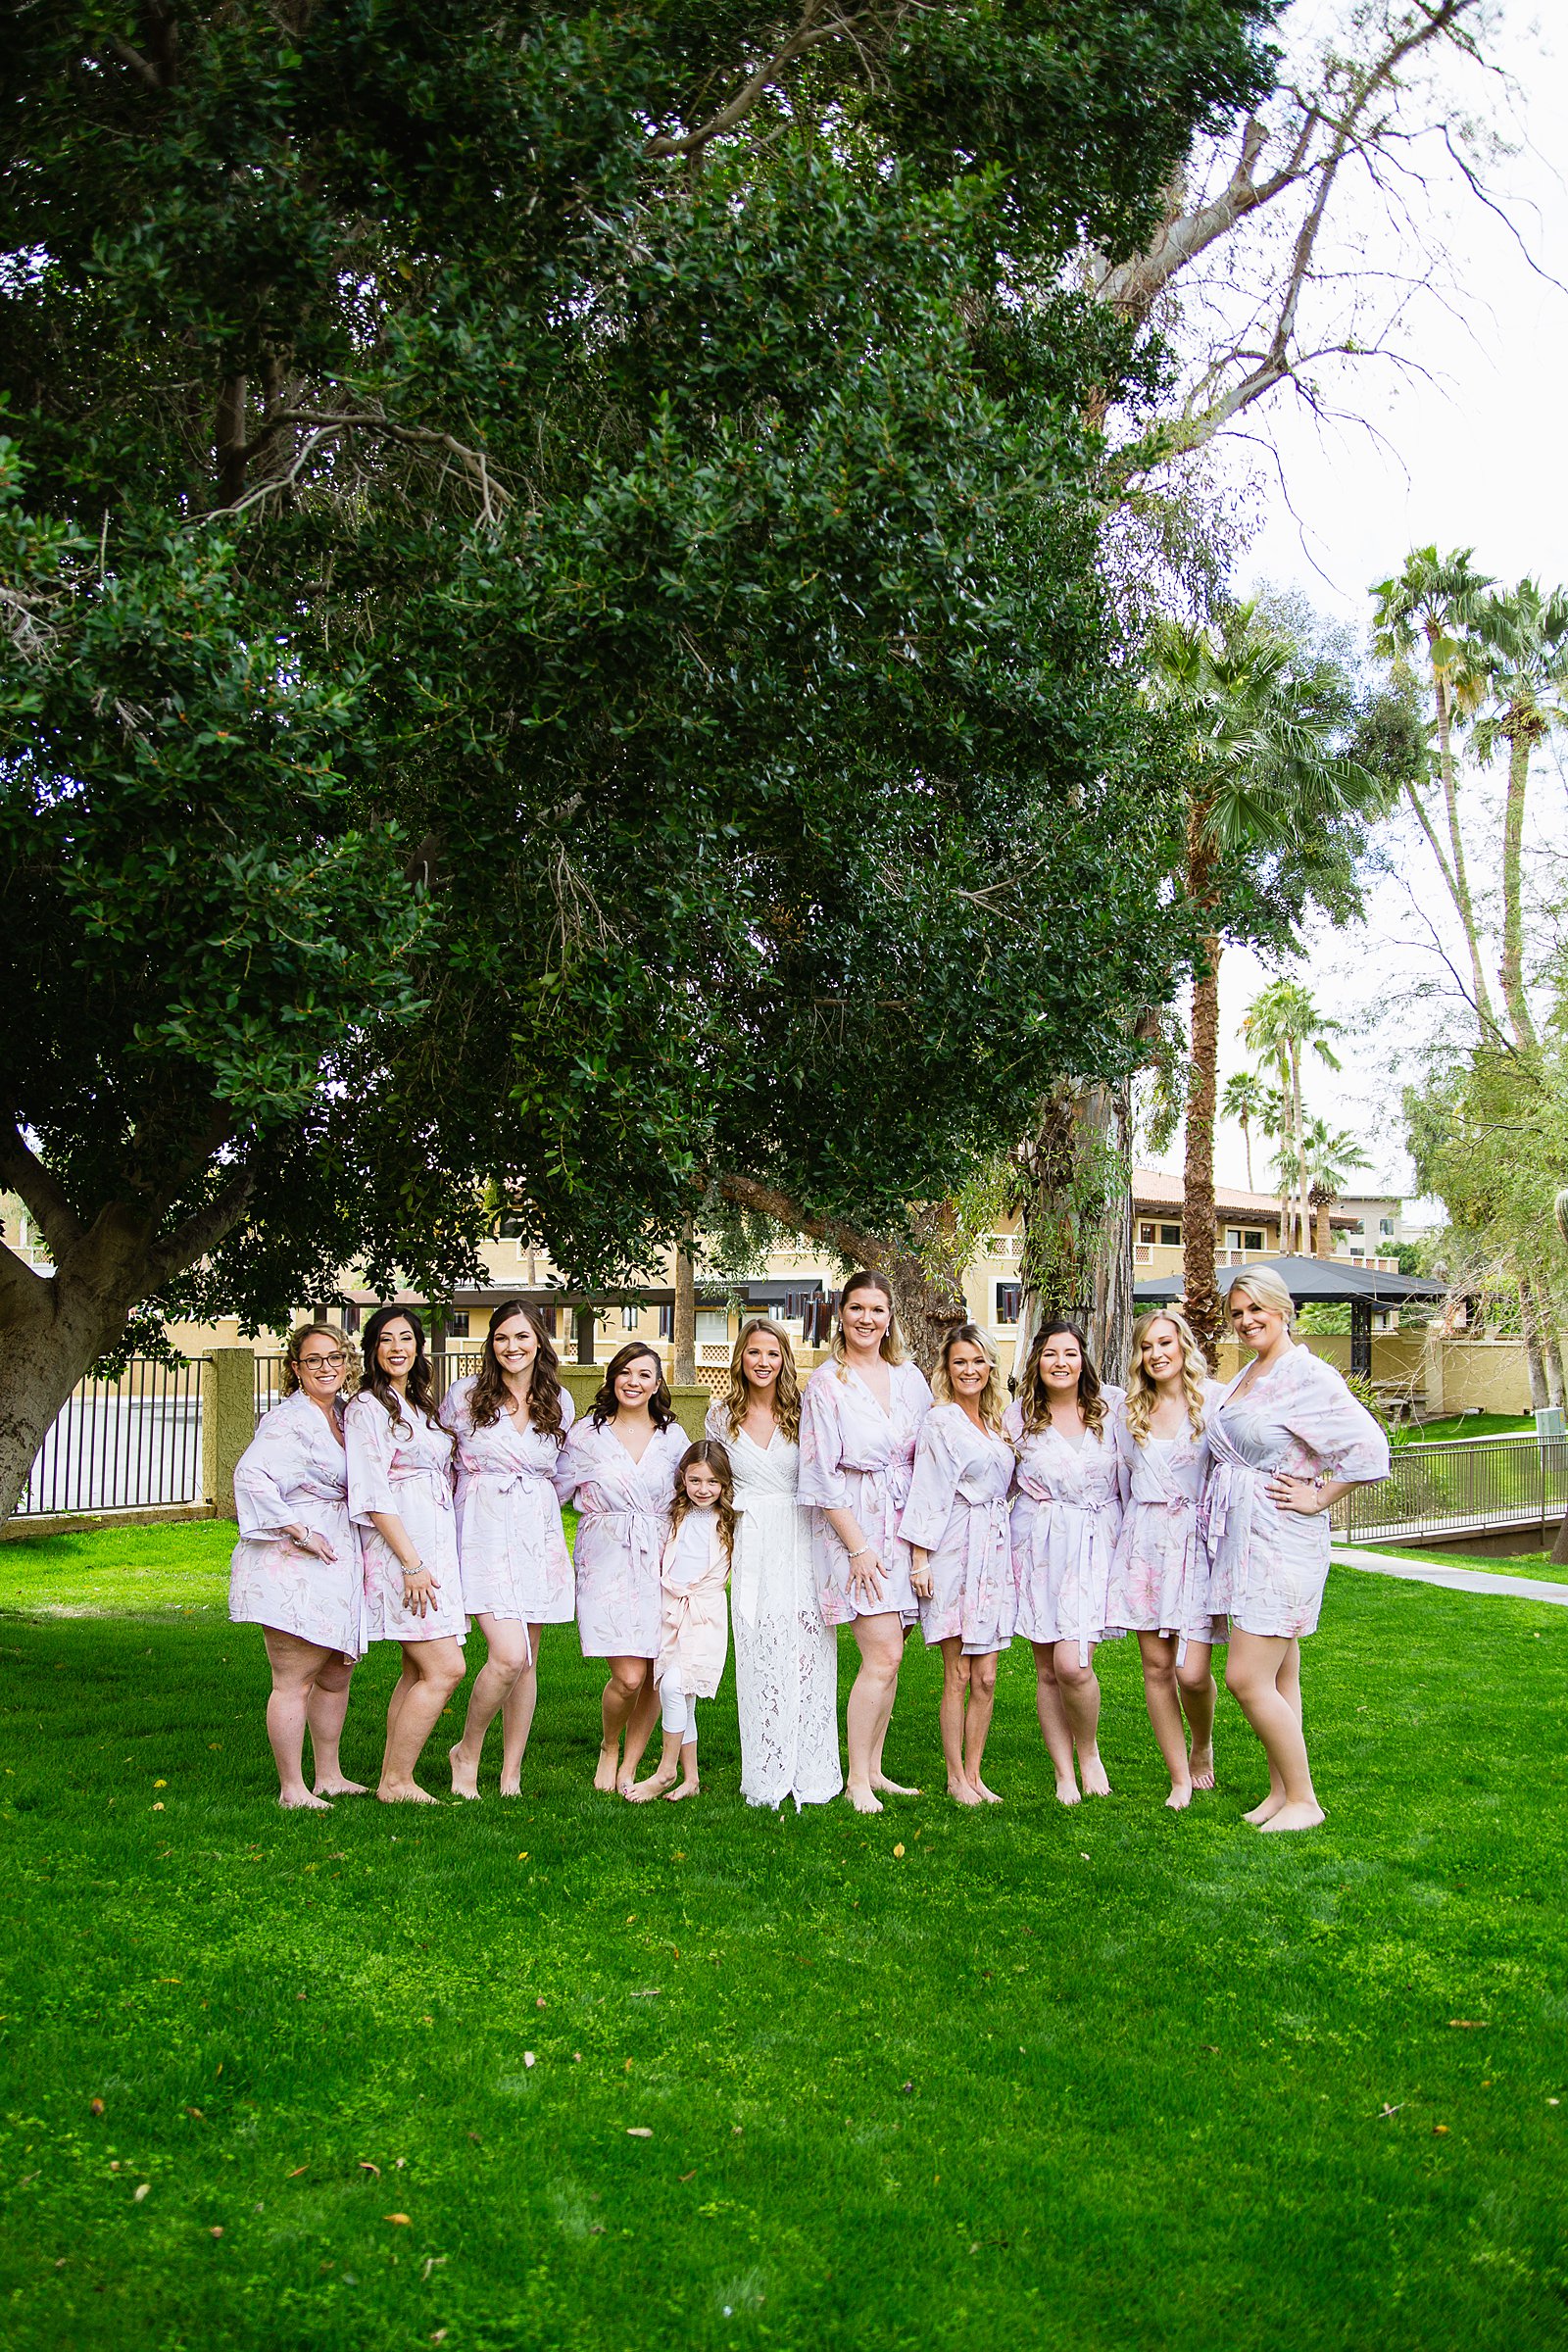 Bride and bridesmaids together in matching robes while getting ready for the wedding day by PMA Photography.